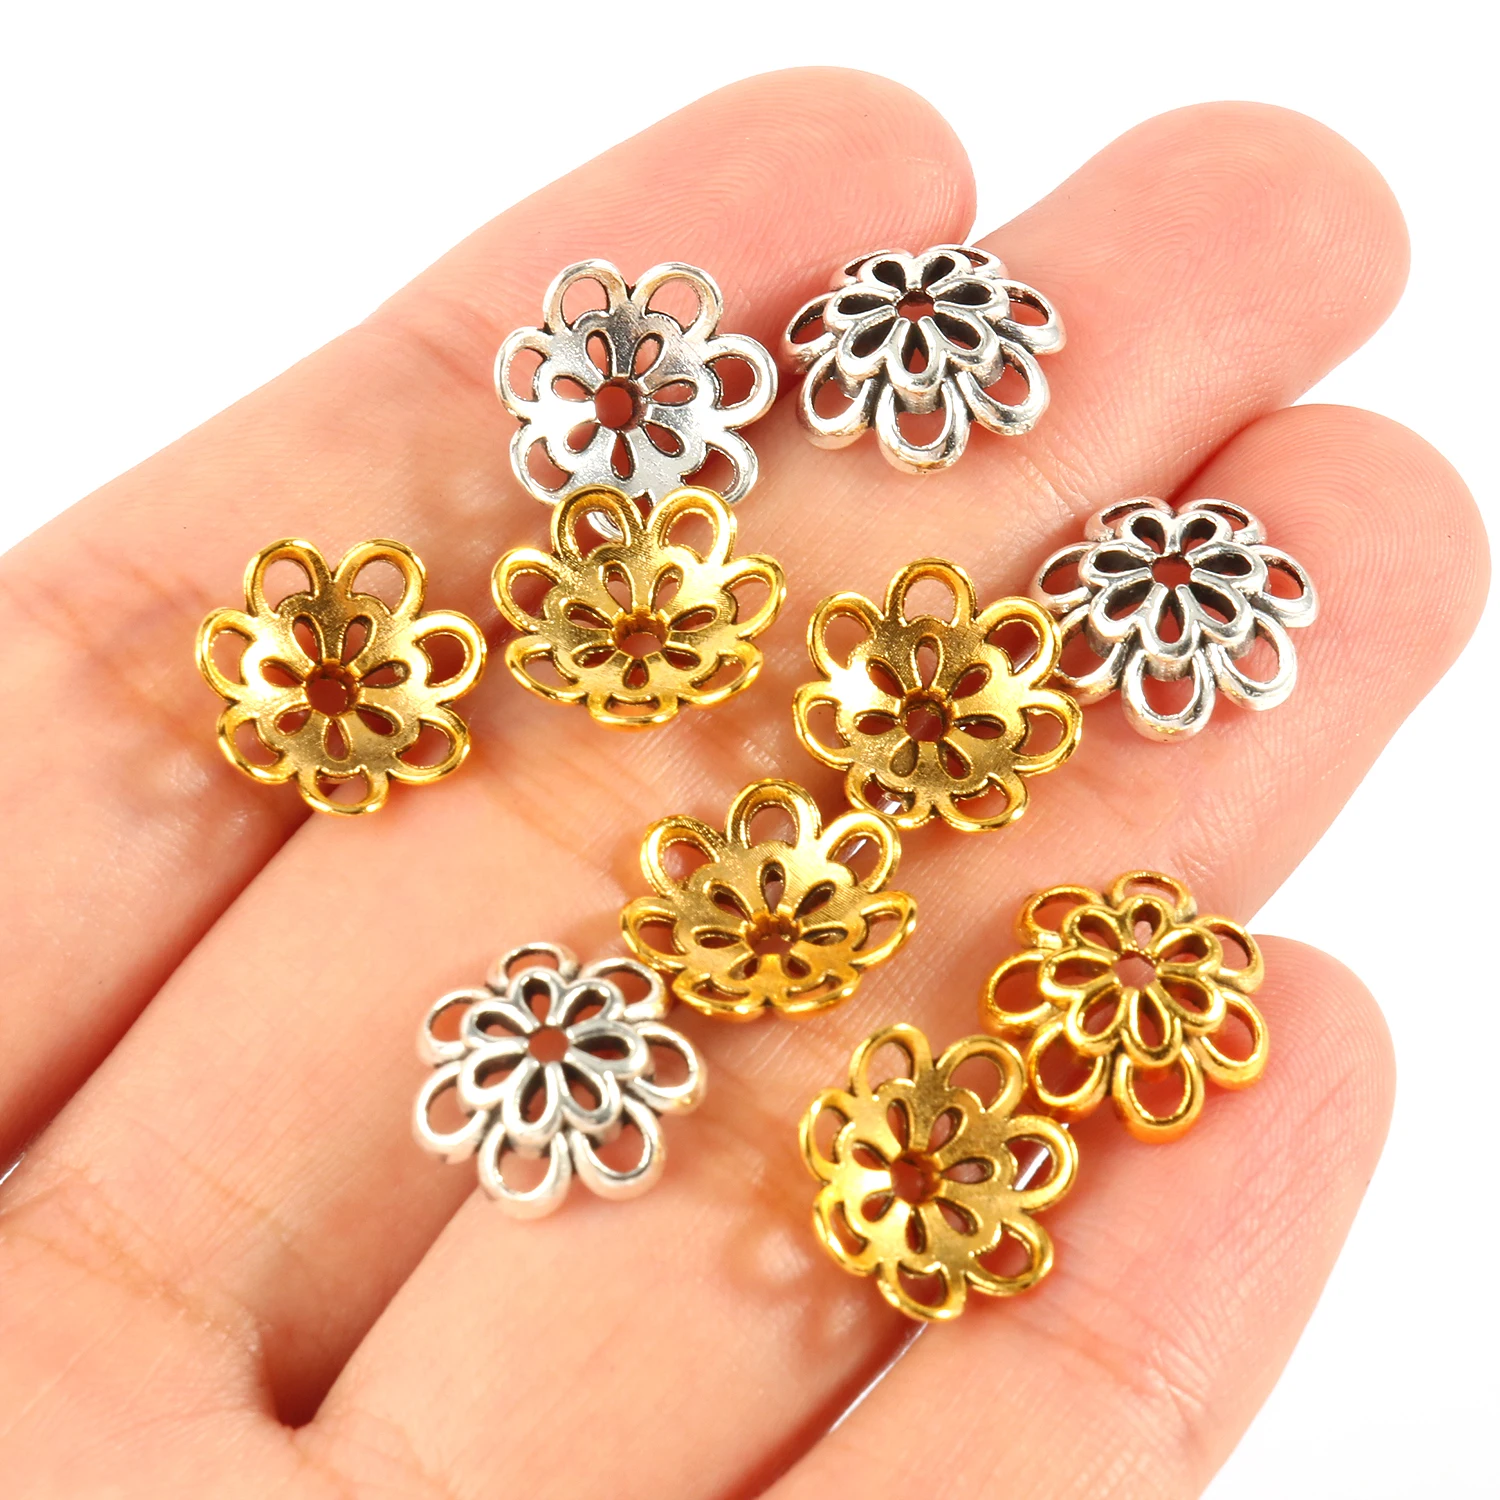 

Tibetan Antique Silver Color Gold Flower Metal Spacer Loose Beads End Caps for Jewelry Making Diy Needlework Finding Accessories